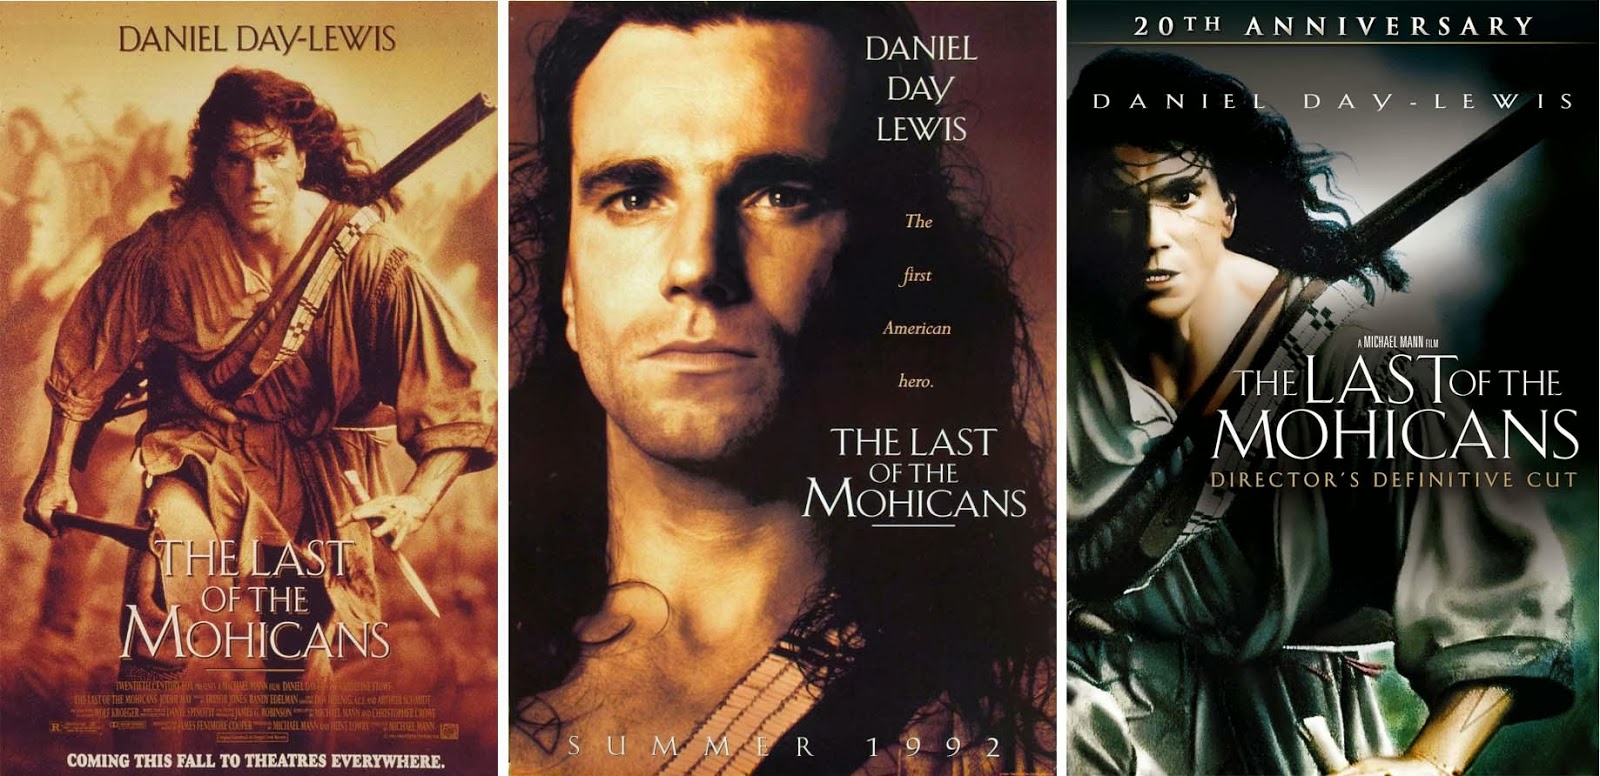 The Last of the Mohicans - Ostatni Mohikanin (1992)